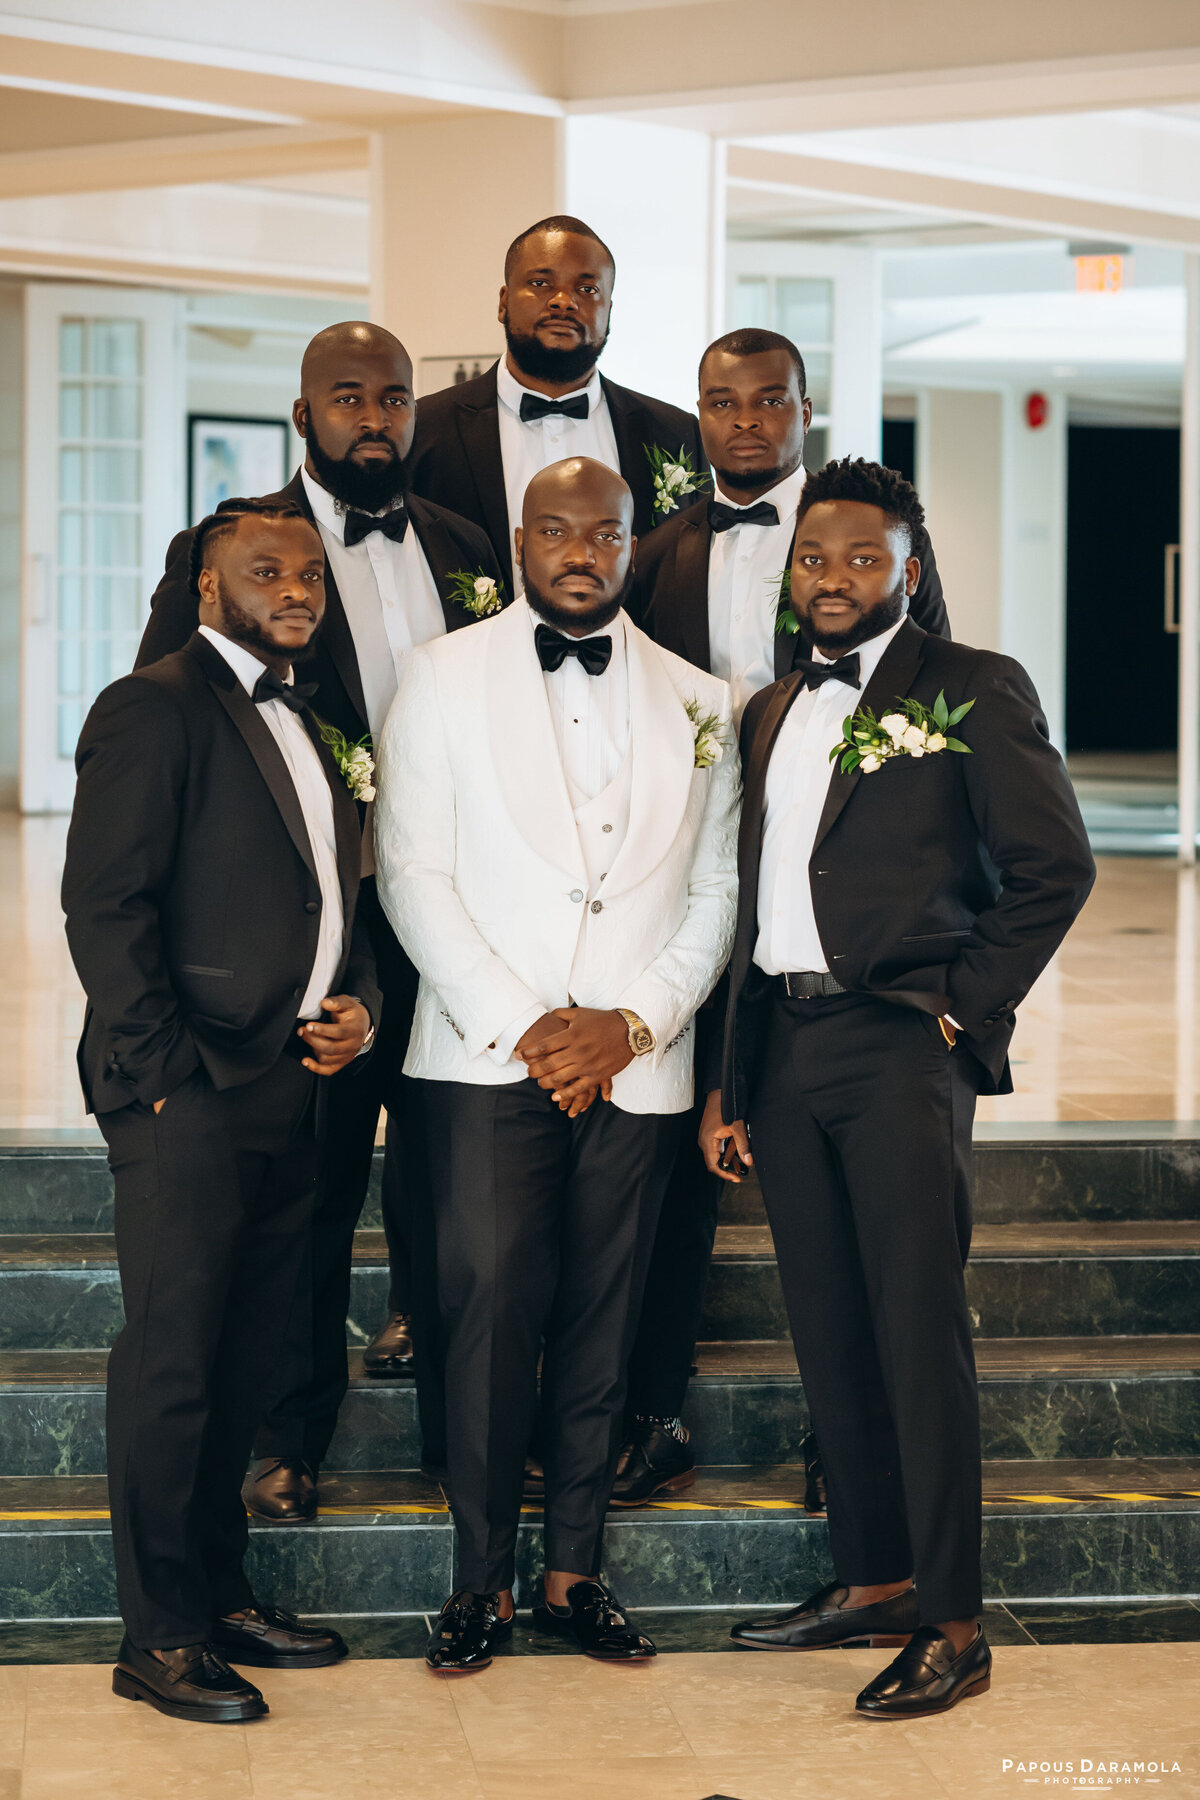 Abigail and Abije Oruka Events Papouse photographer Wedding event planners Toronto planner African Nigerian Eyitayo Dada Dara Ayoola outdoor ceremony floral princess ballgown rolls royce groom suit potraits  paradise banquet hall vaughn 12